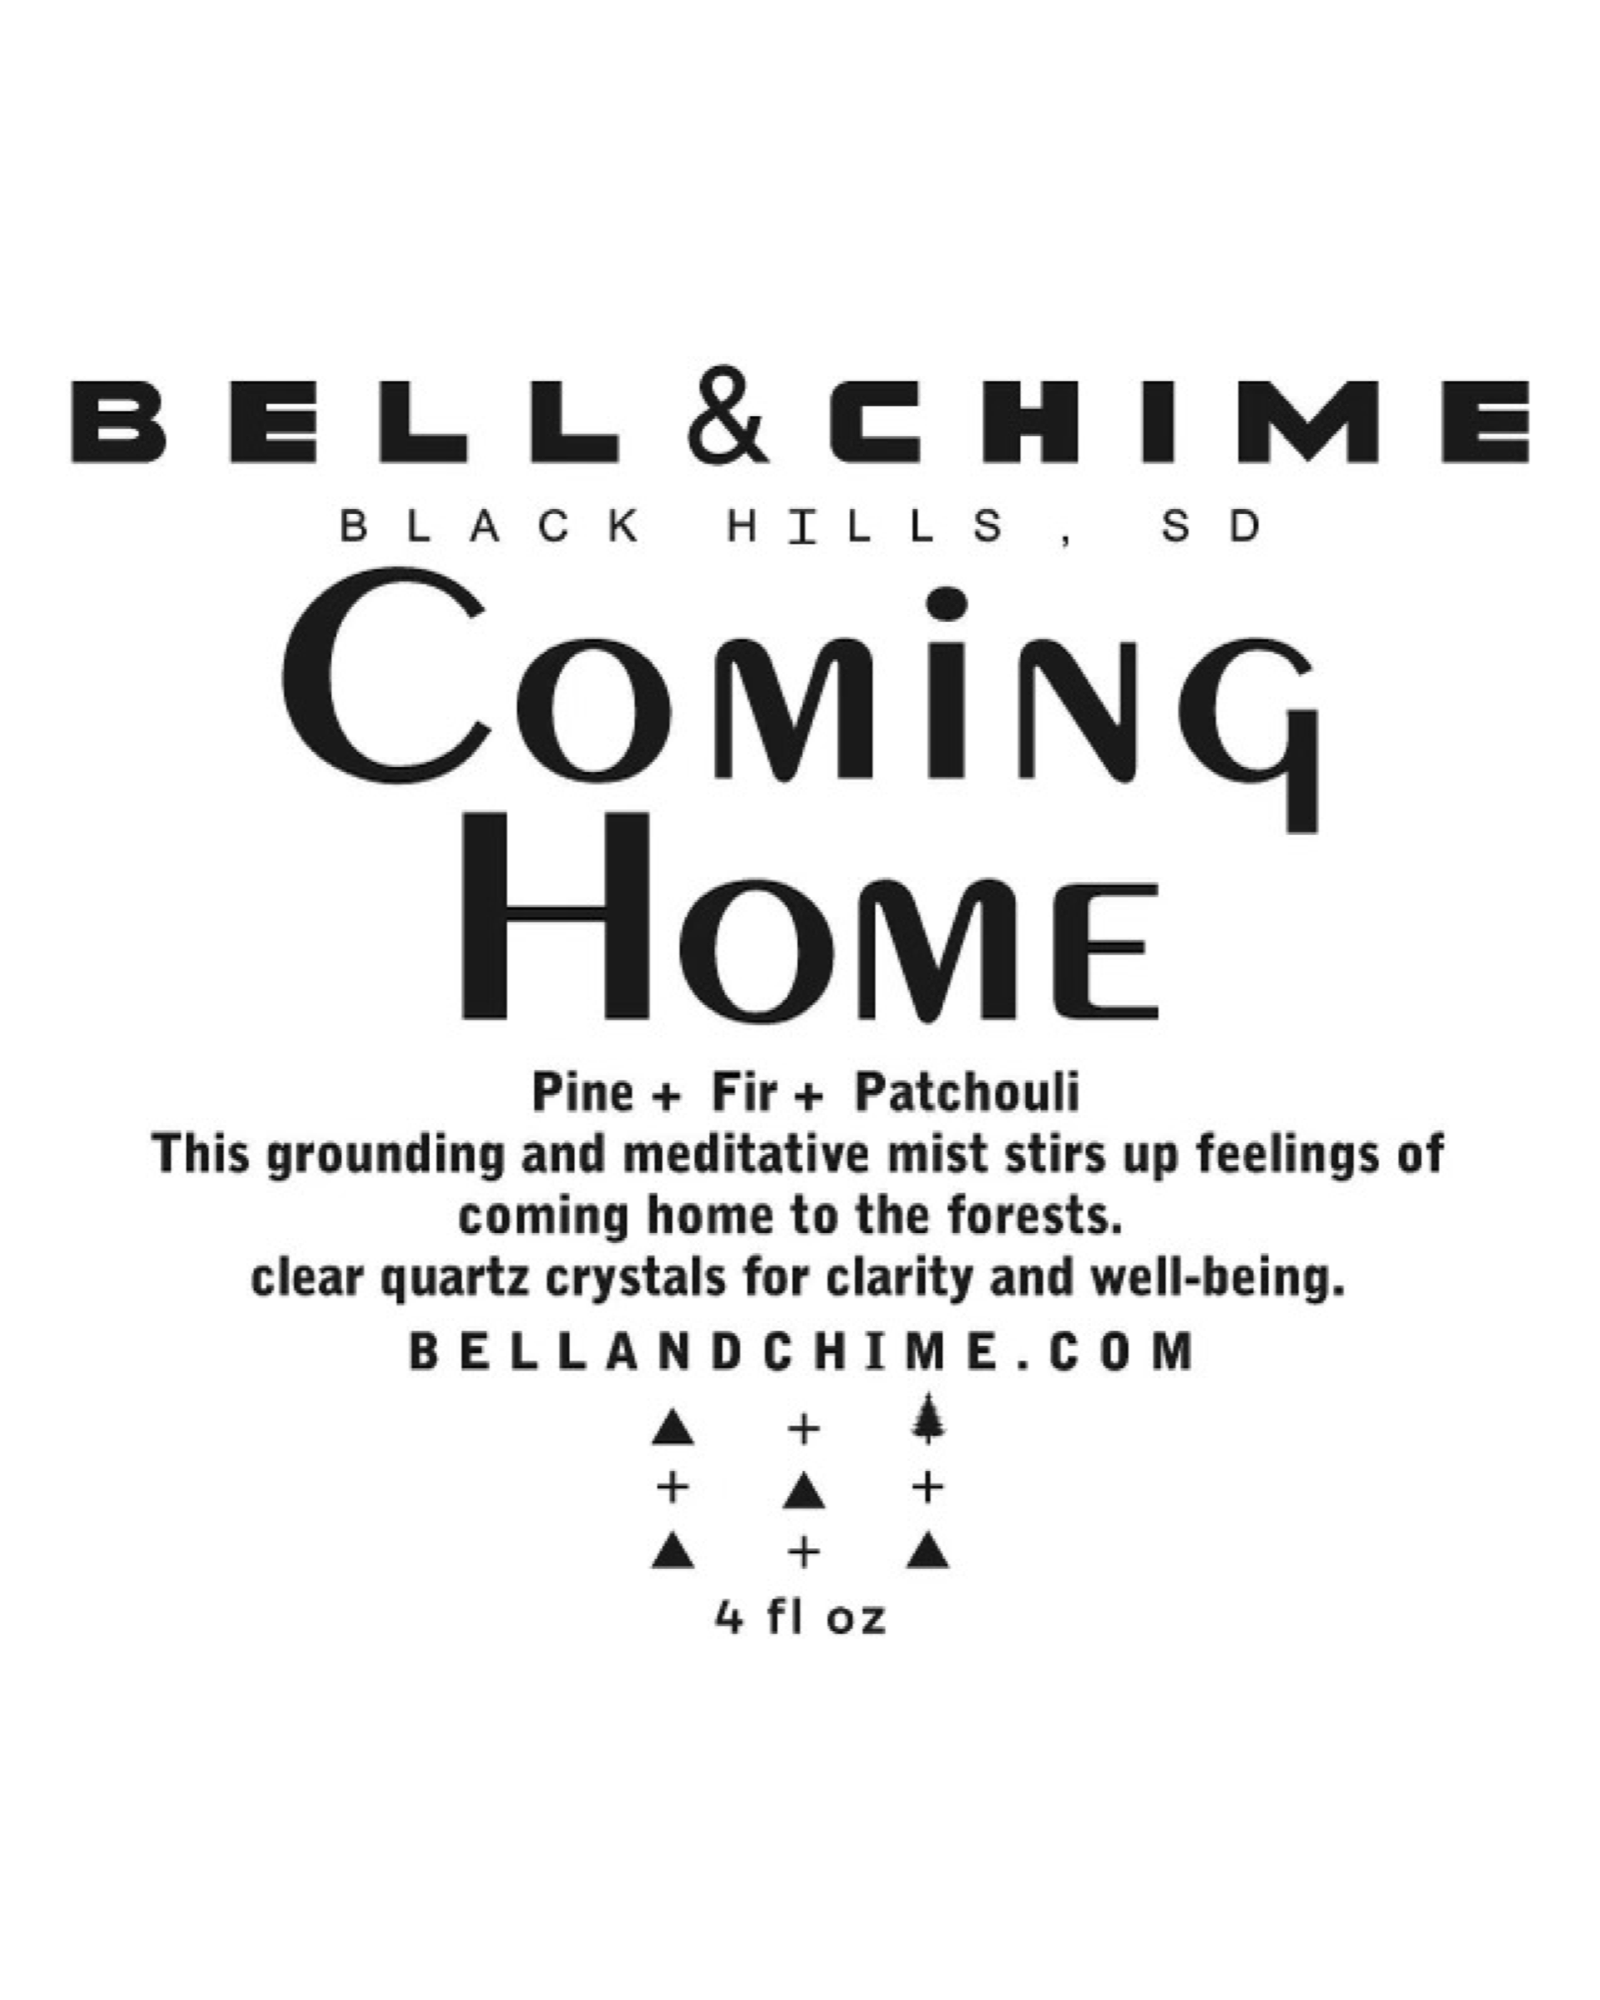 Bell & Chime: Black Hills, SD "Coming Home," Pine + Fir + Patchouli, This grounding and meditative mist stirs up feelings of coming home to the forests. Clear quartz crystals for clarity and well-being. 4 fl oz.